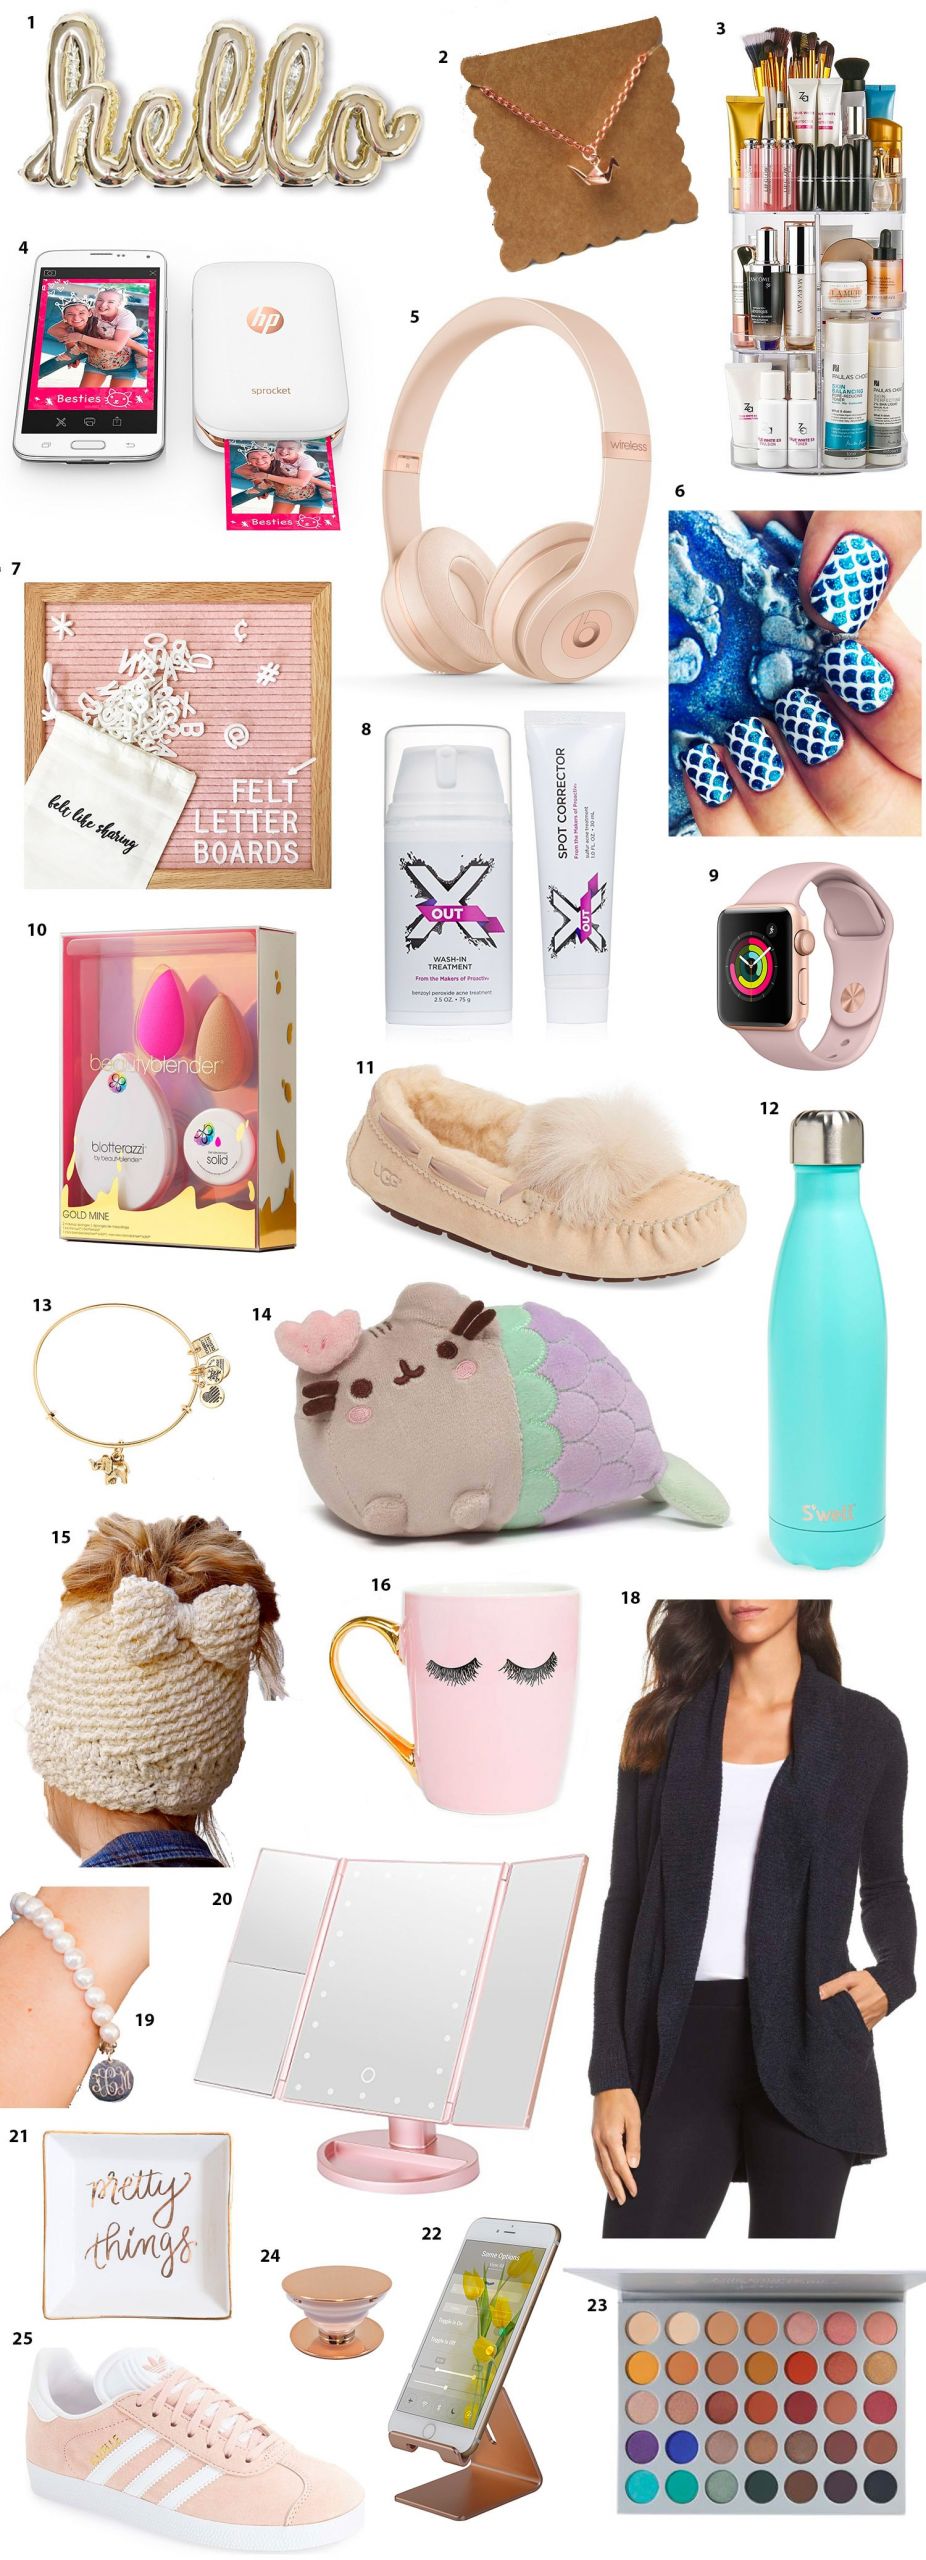 Teen Christmas Gift Ideas
 Top Gifts for Teens This Christmas